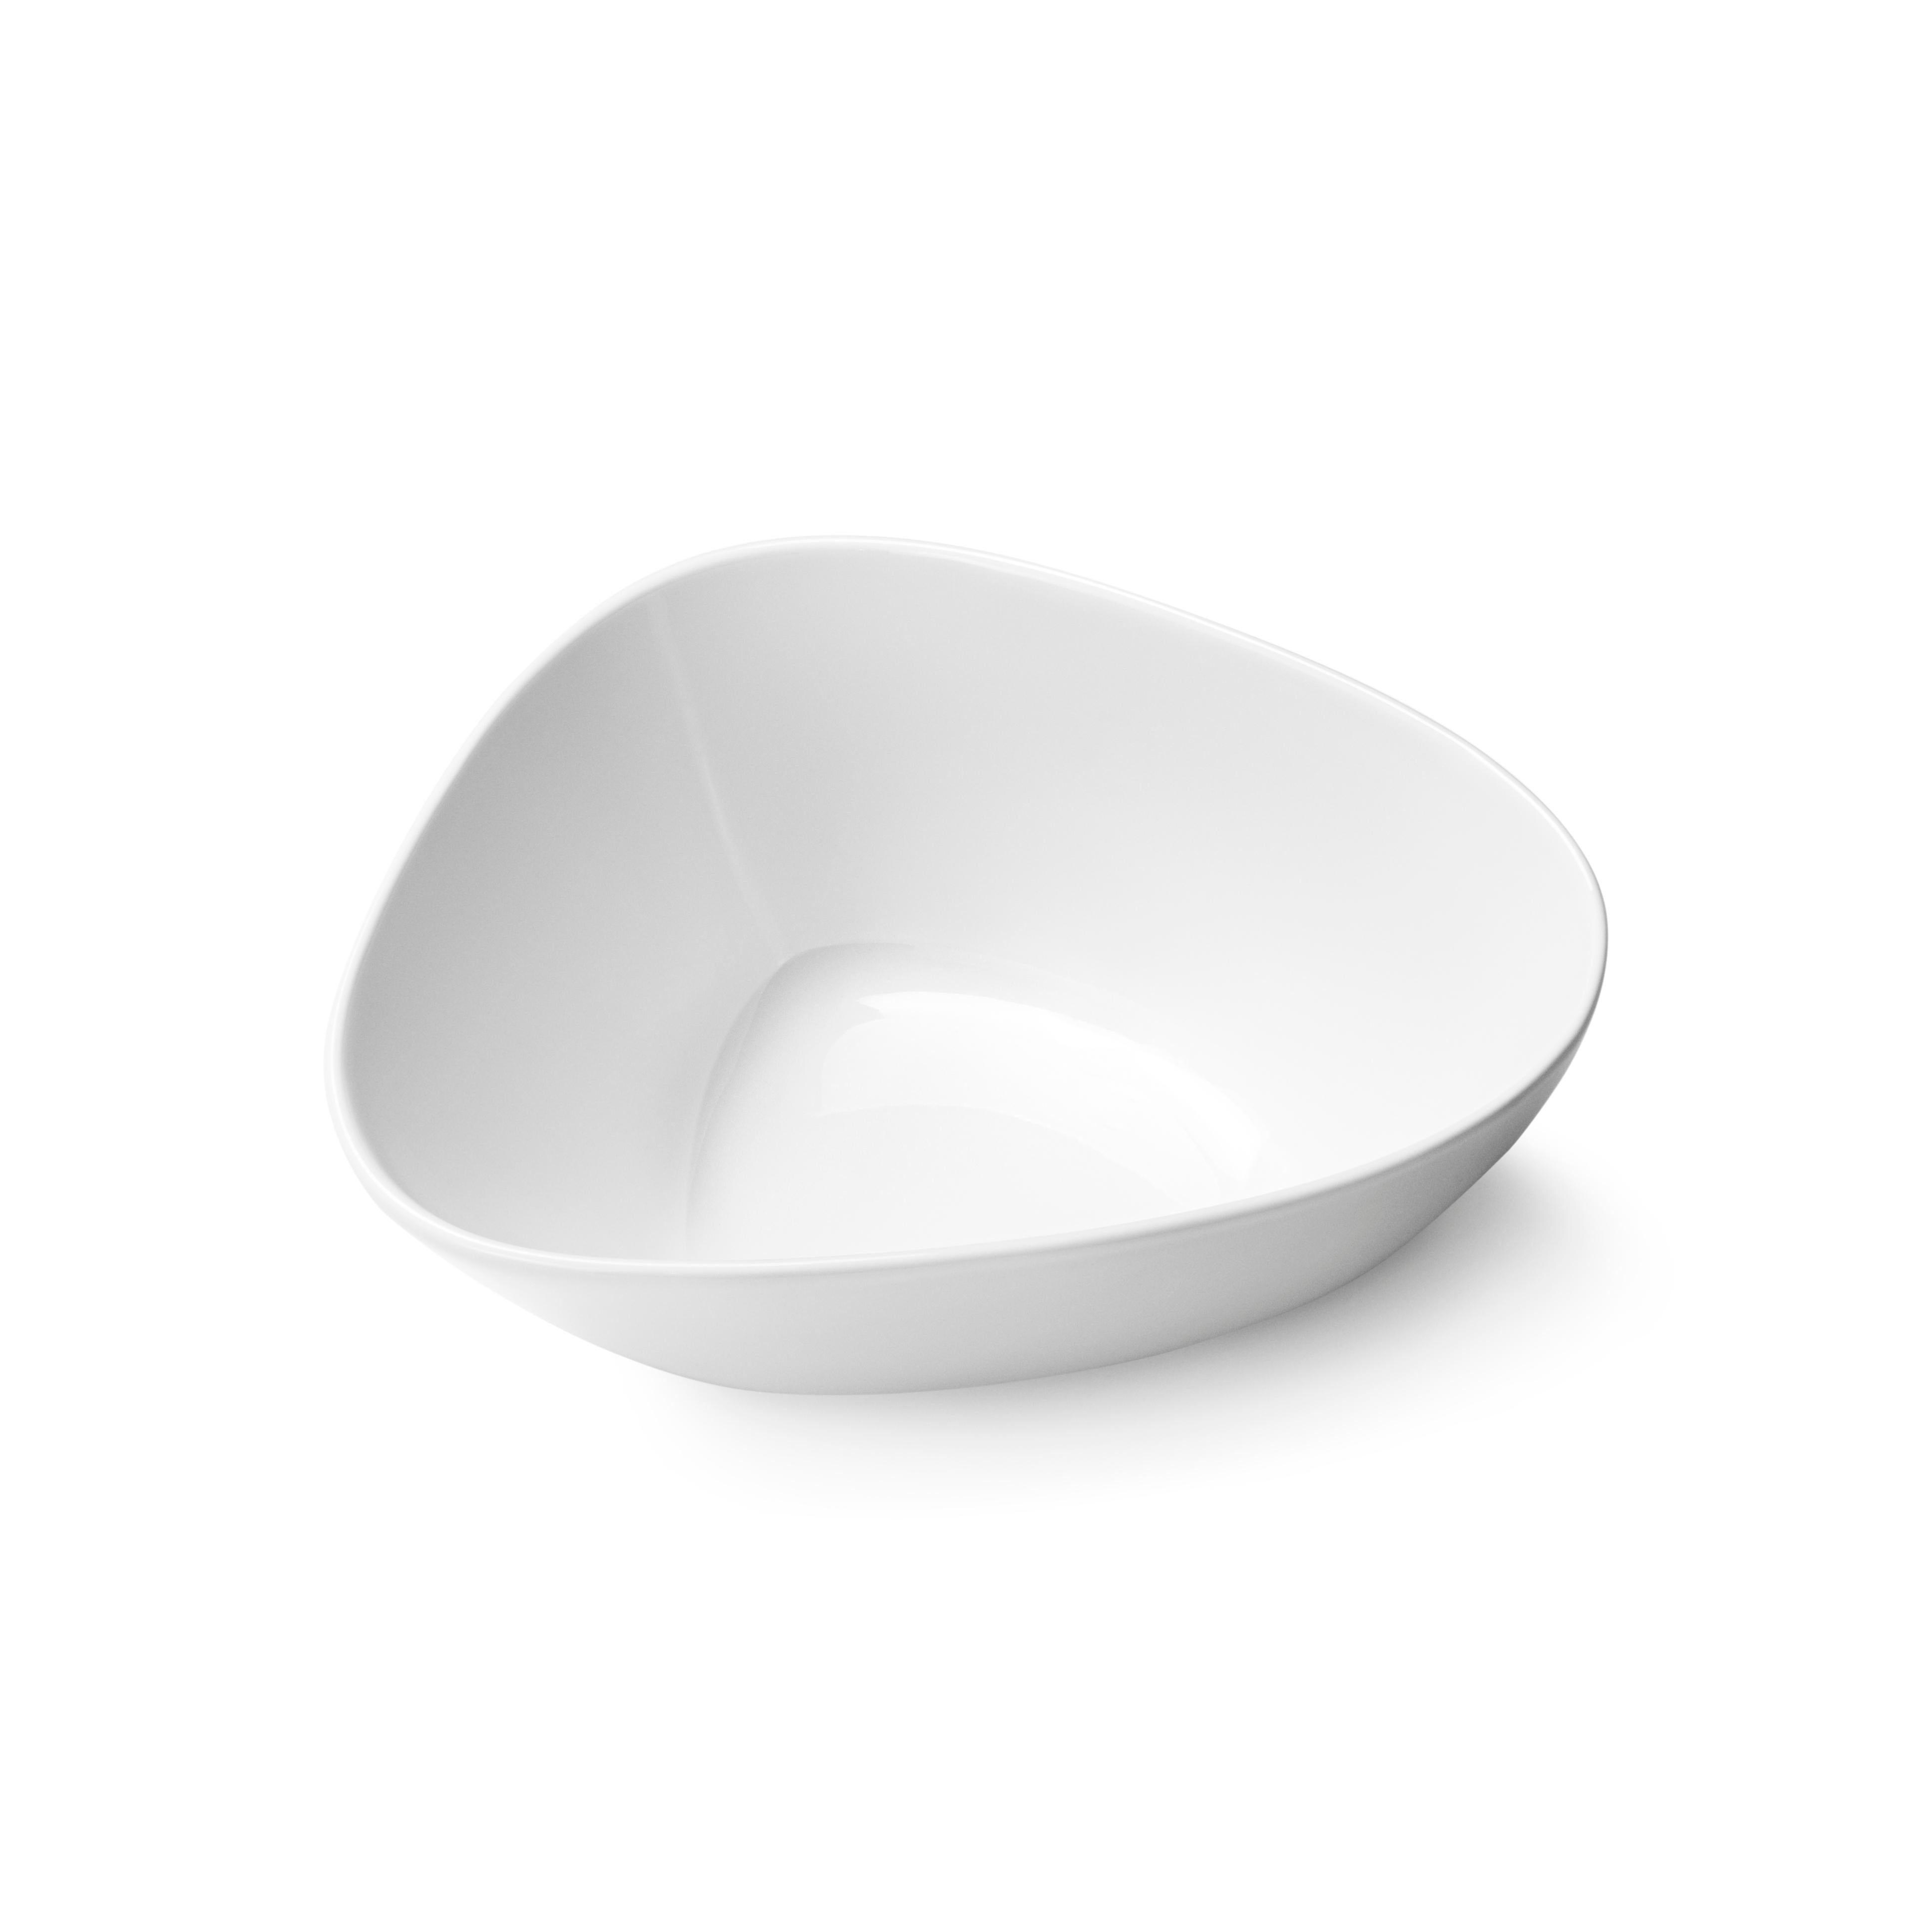 Eye-catching and contemporary, this small white porcelain bowl is the perfect size for all-purpose use - from breakfast cereal or side salad to serving candies or nuts. Echoing the asymmetric form seen in many of the pieces in the Sky collection,